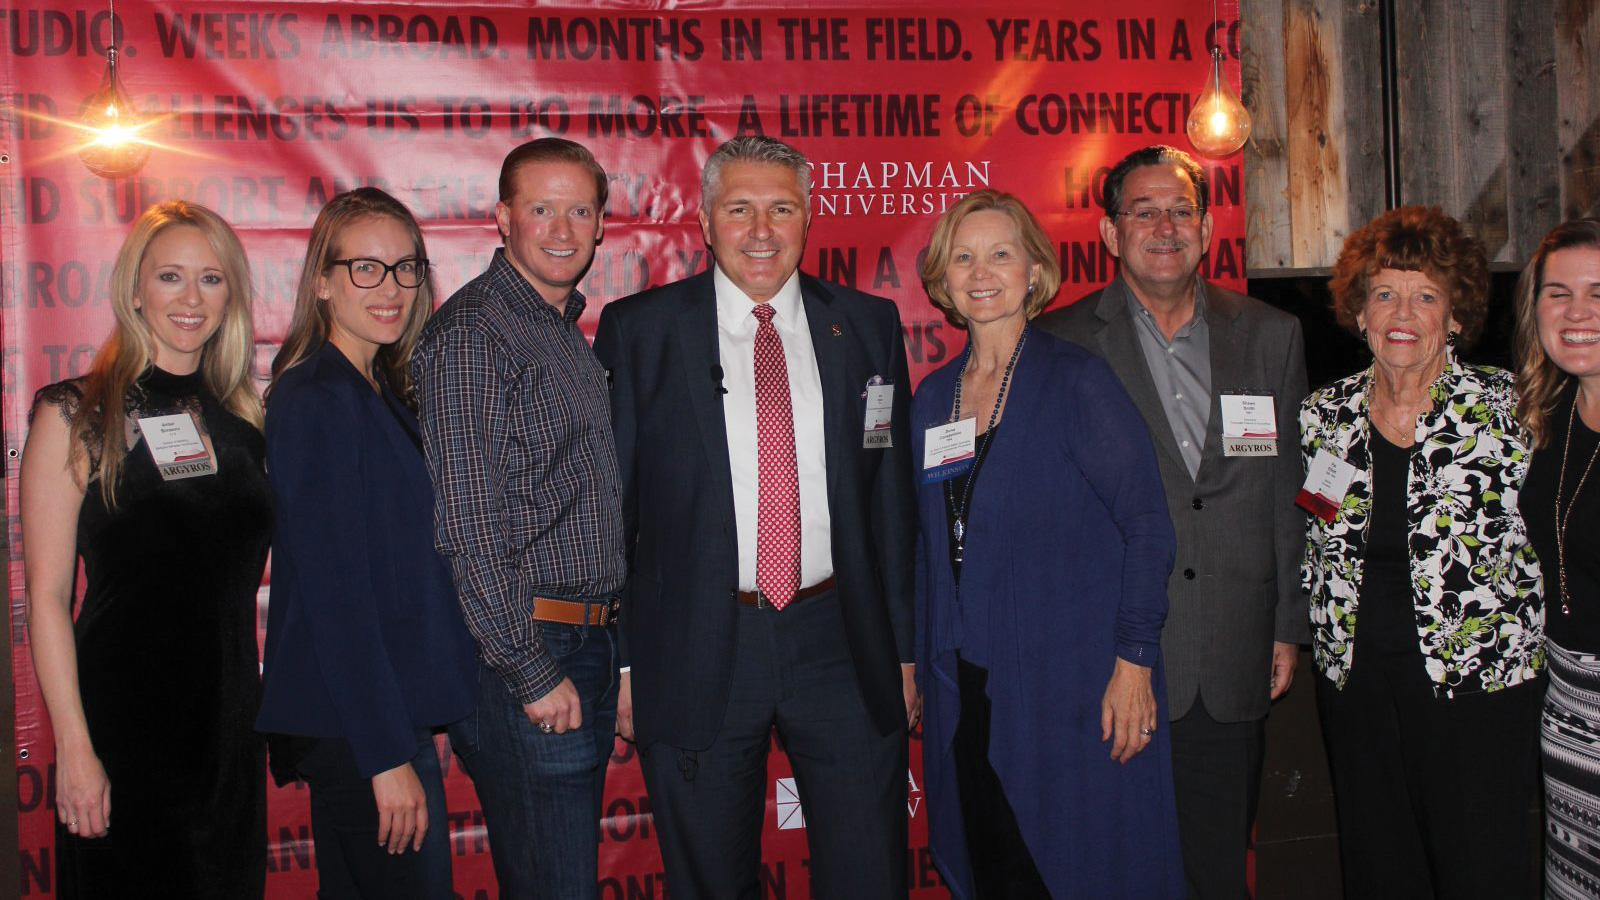 Industry Partners together at Chapman networking event